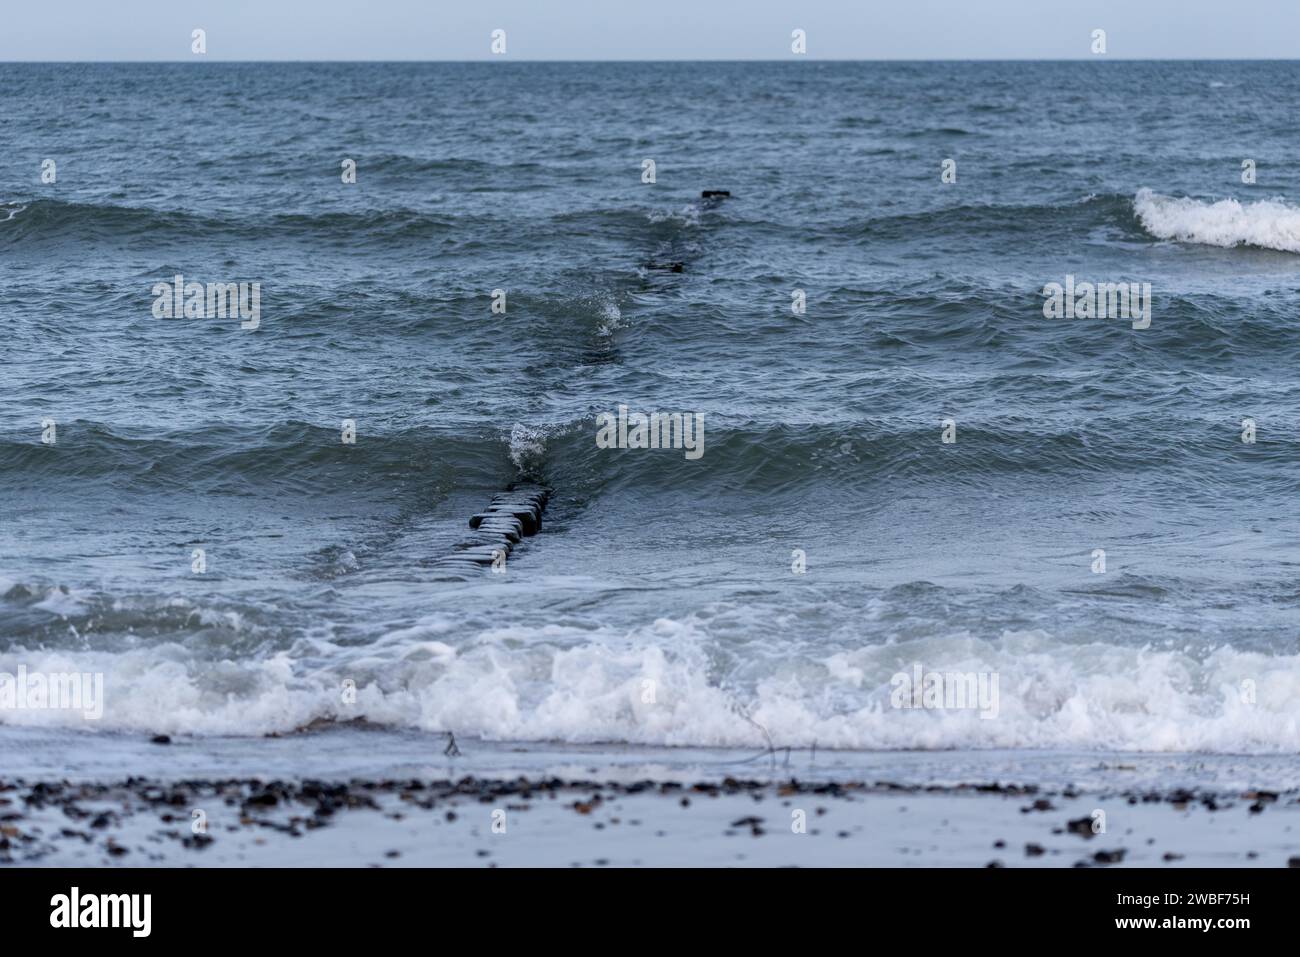 View of foam waves gently lapping against a sandy beach, breakwater, Baltic Sea, Zingst, Mecklenburg-Western Pomerania, Germany Stock Photo